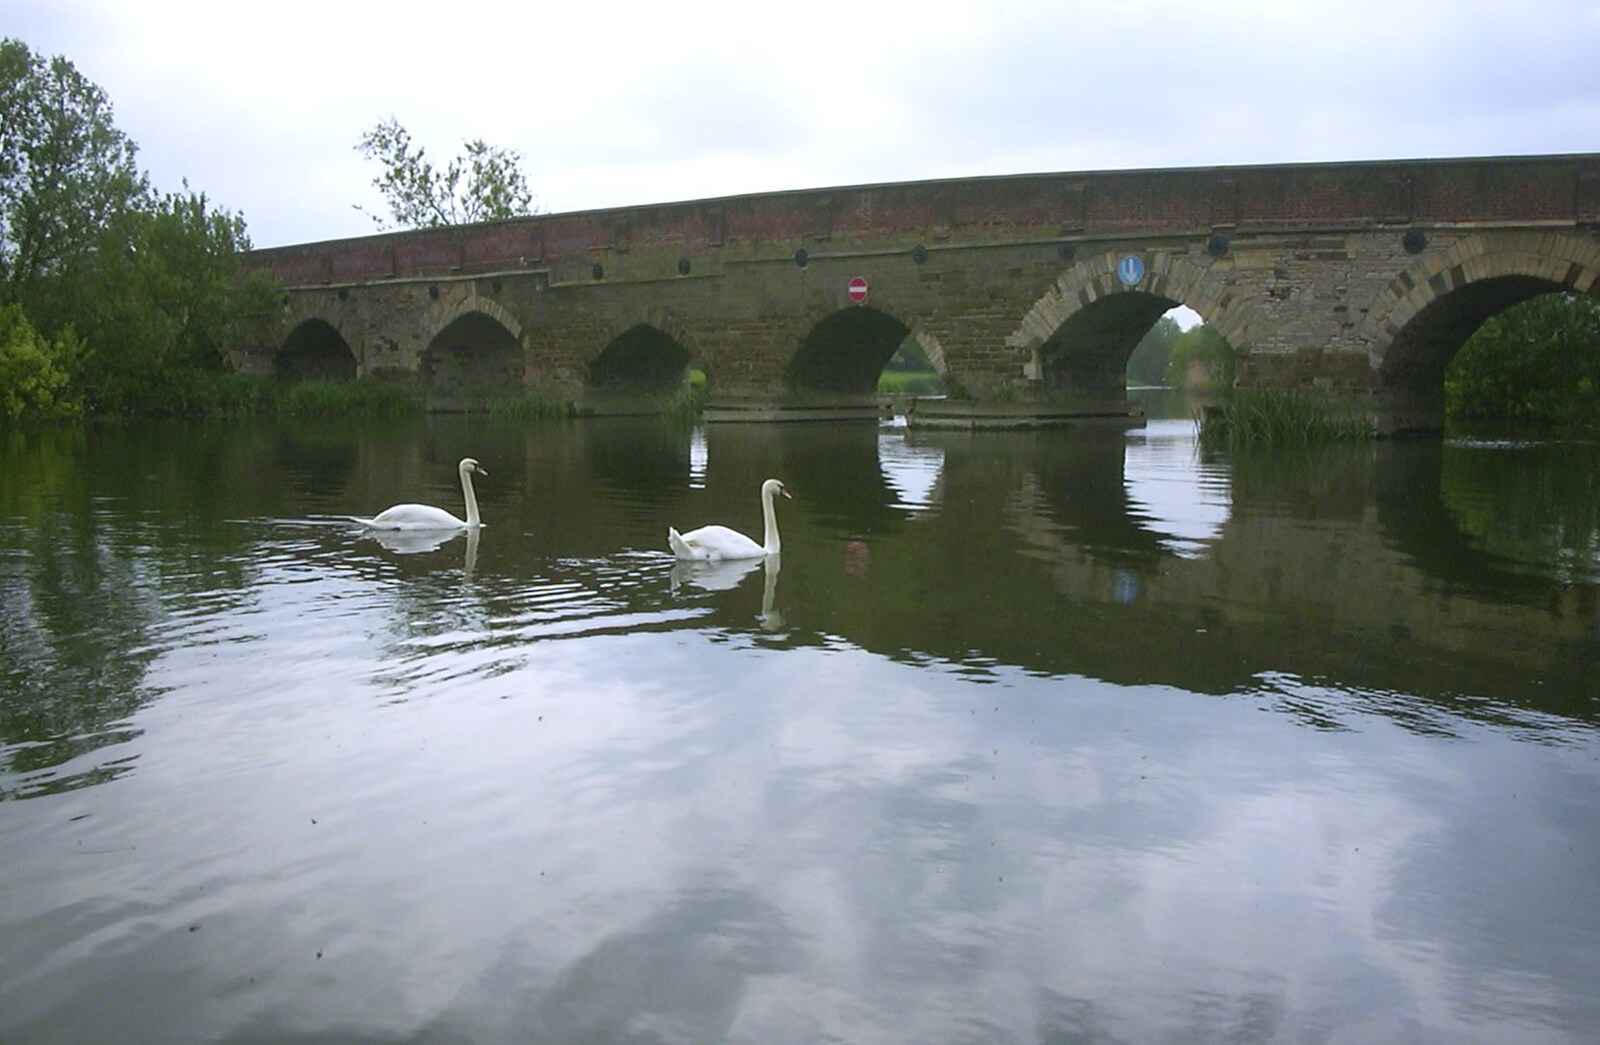 The BSCC Bike Ride, Shefford, Bedford - 11th May 2002: Swans drift by